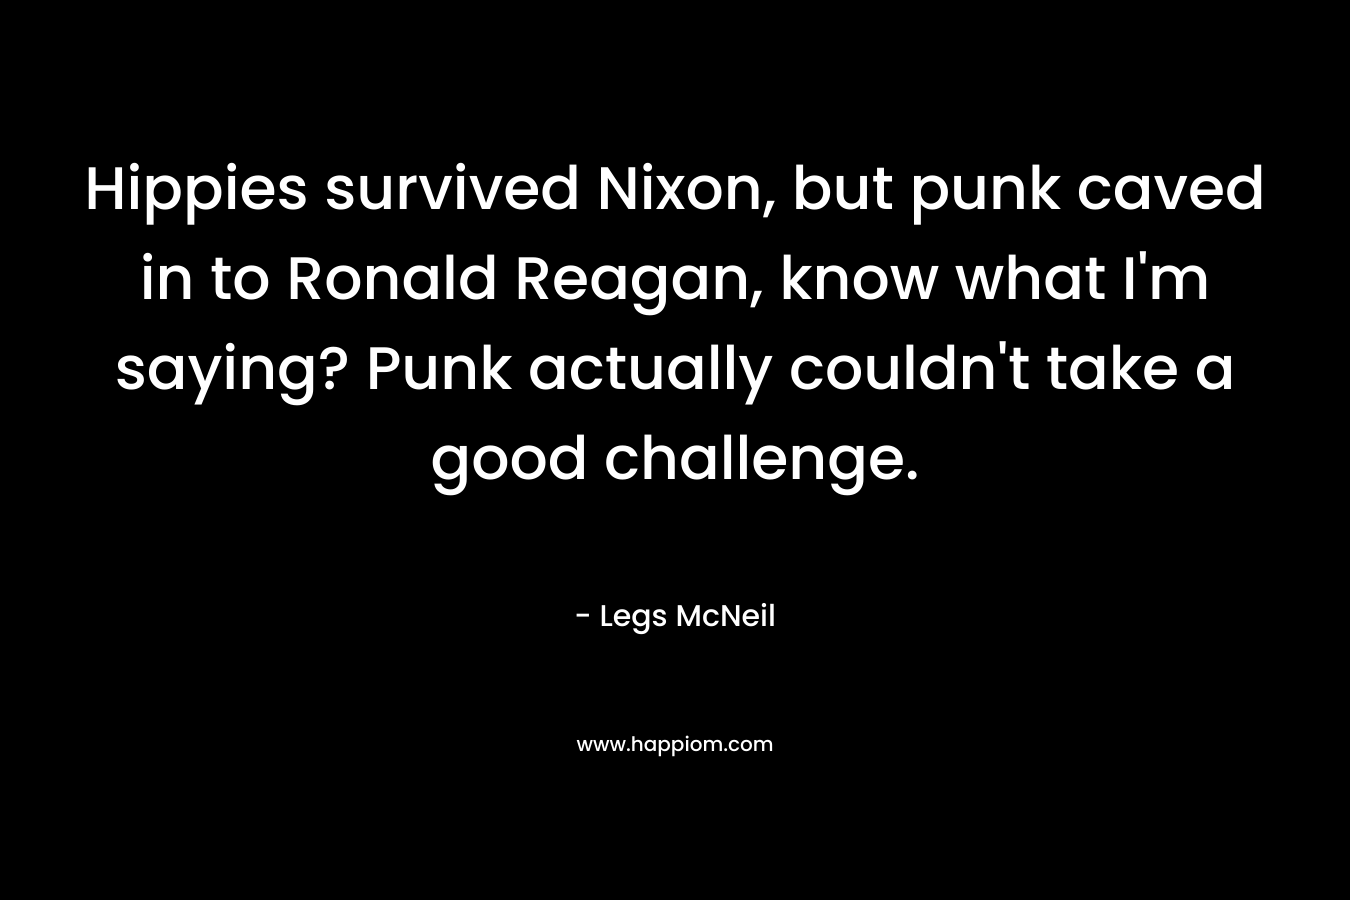 Hippies survived Nixon, but punk caved in to Ronald Reagan, know what I'm saying? Punk actually couldn't take a good challenge.